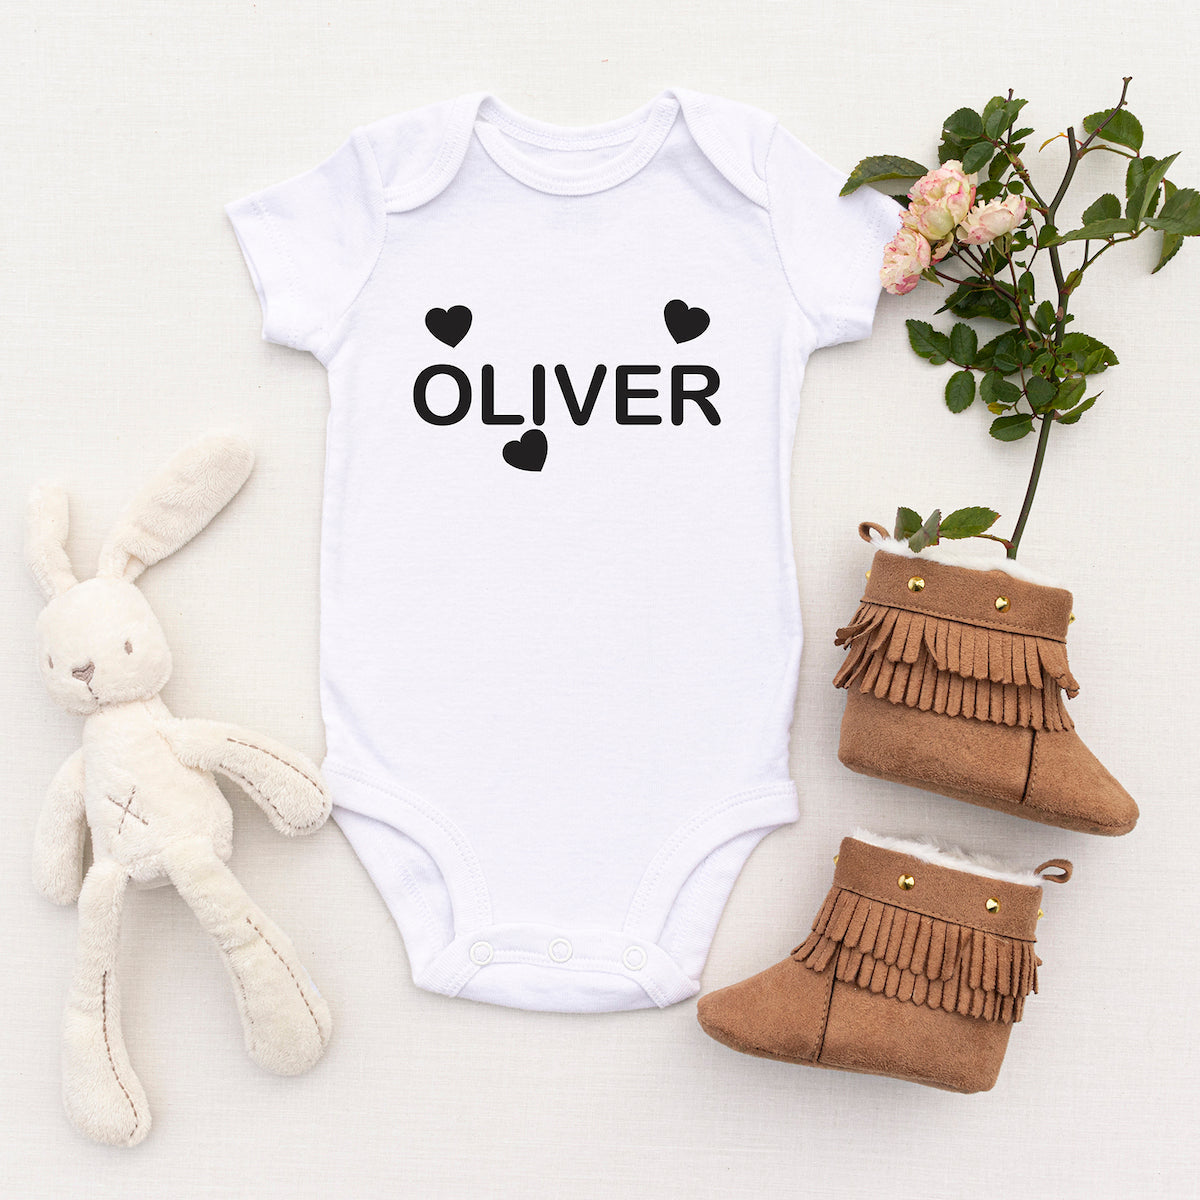 Personalised White Baby Body Suit Grow Vest - Triple Heart